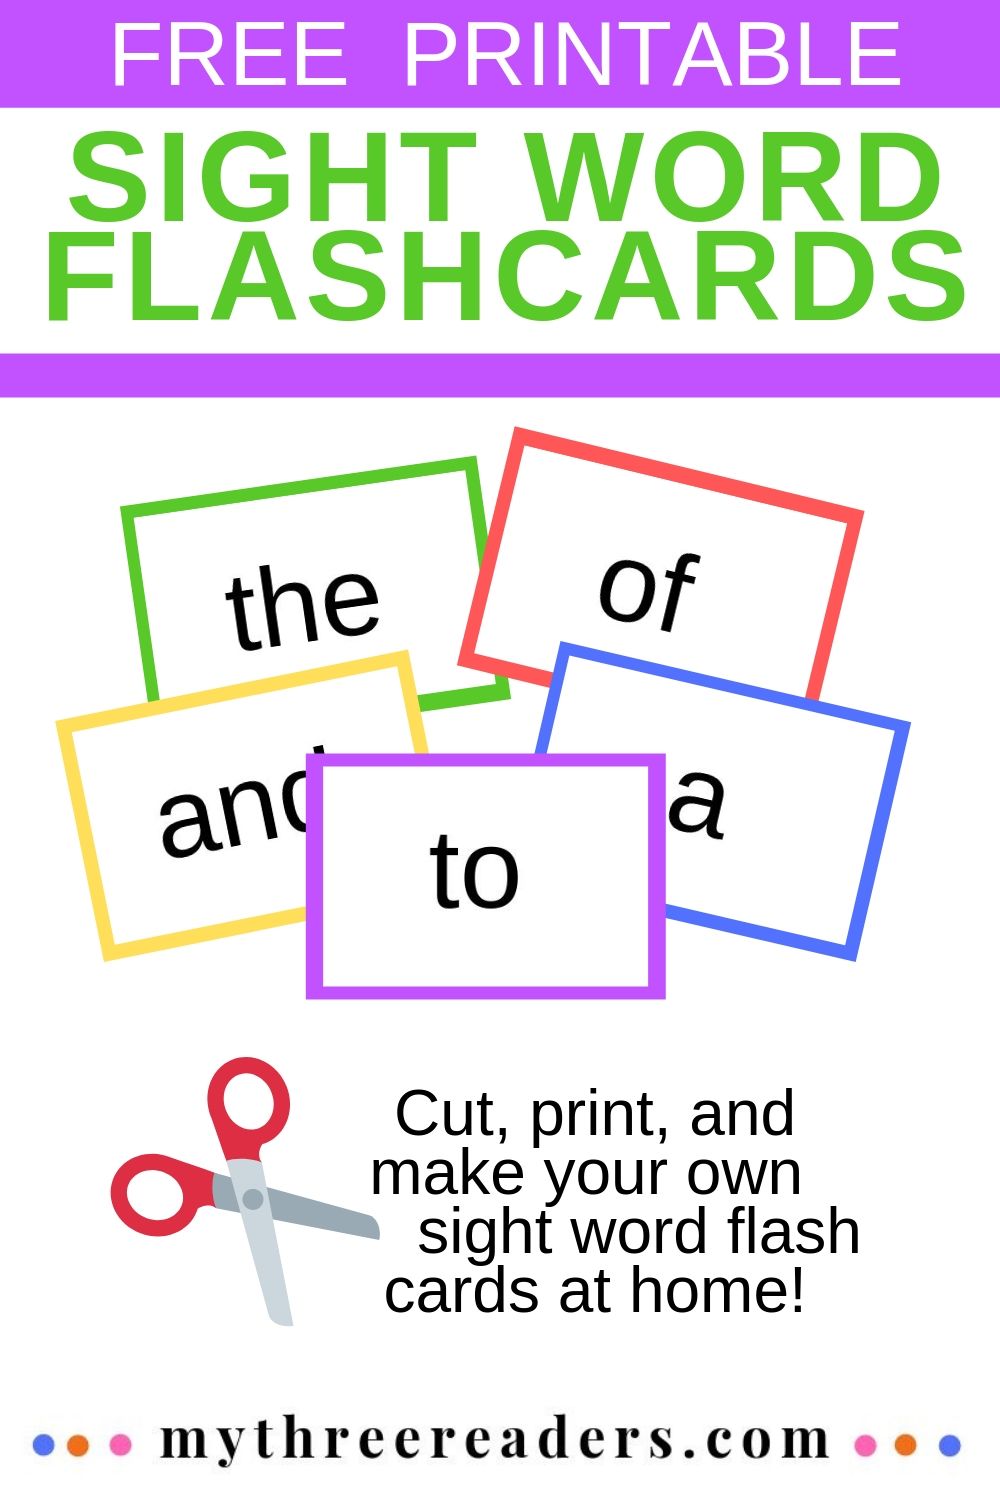 Make Your Own Sight Word Flash Cards Free Printable for You